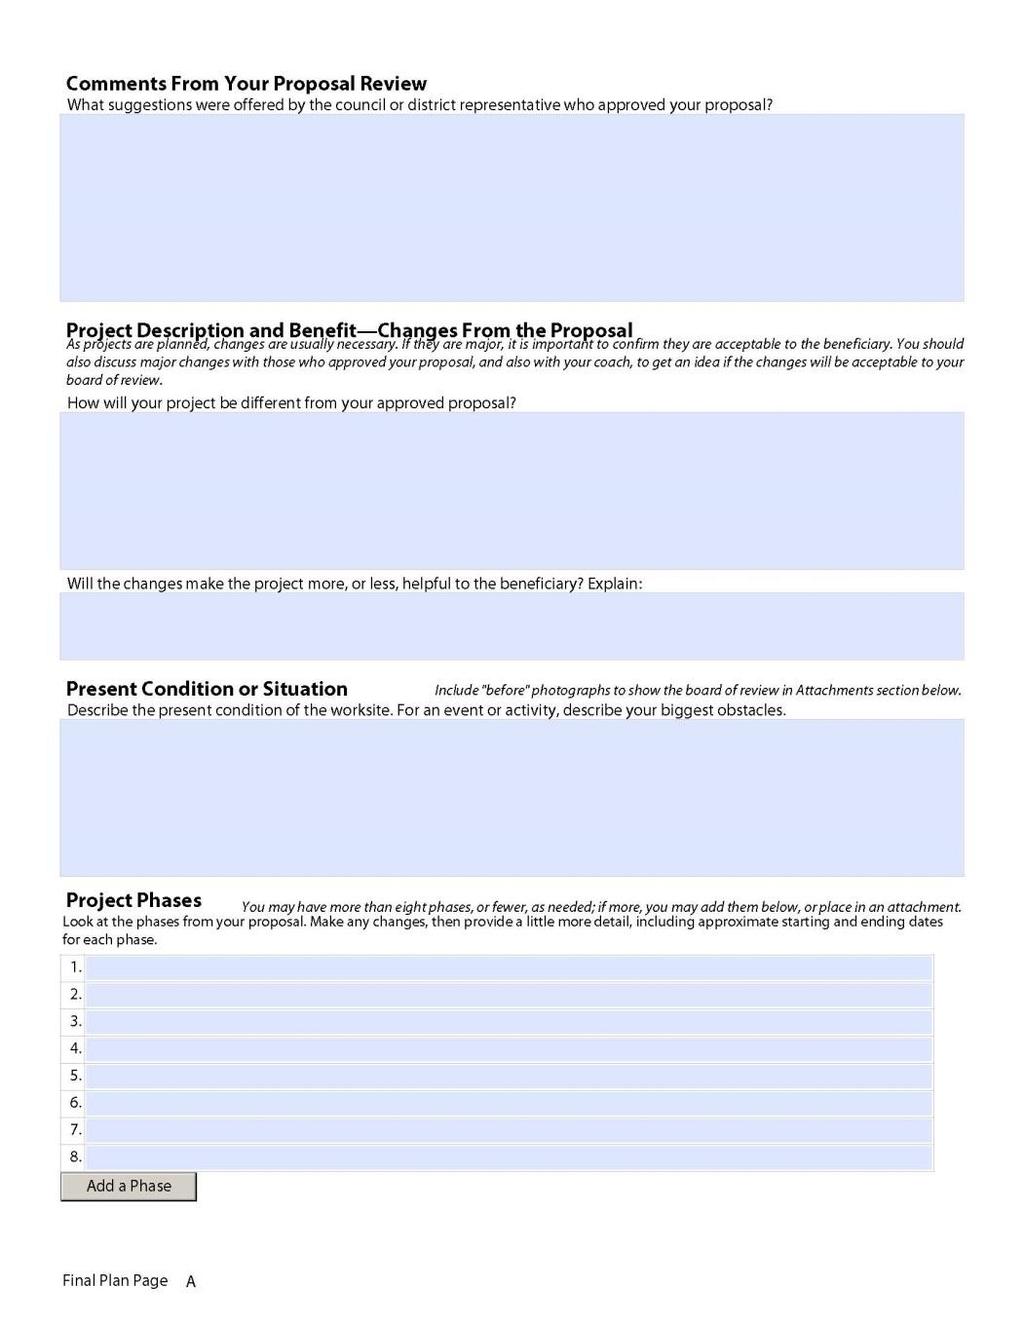 Final Plan Page A Completed by Eagle Candidate following Proposal Approval Comments From Your Proposal Review Project Description and Benefit Changes